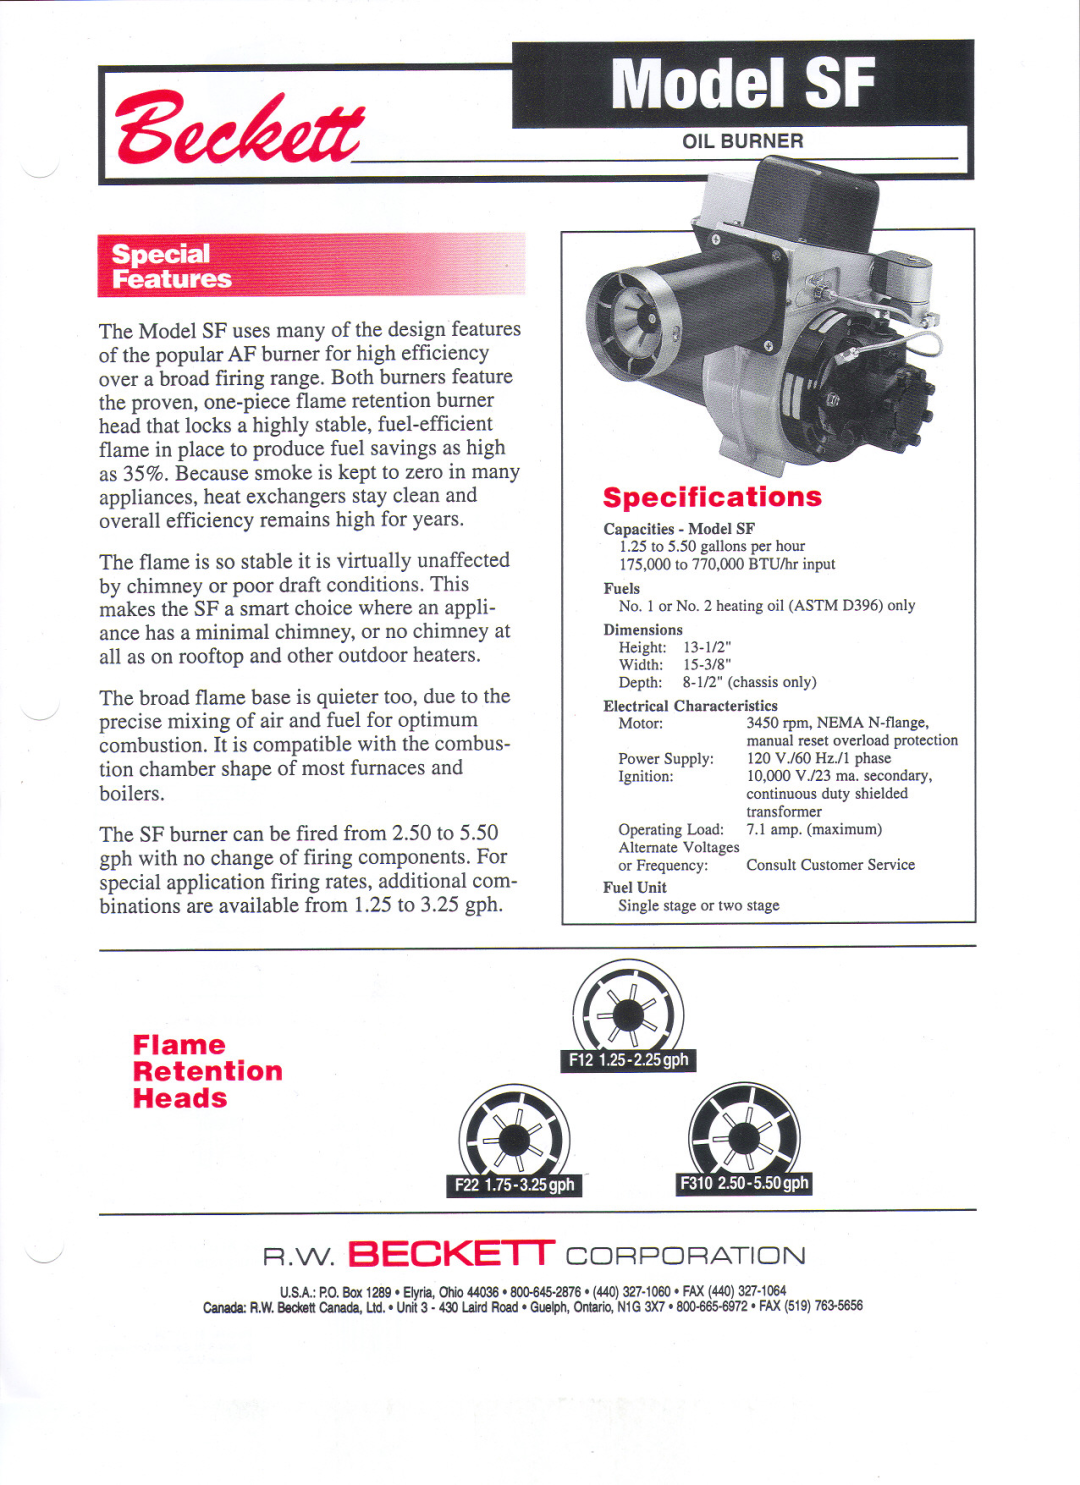 Beckett SF specifications ~edett, Flame Retention Heads, Specifications, ~R.W. Becketi Corporation 